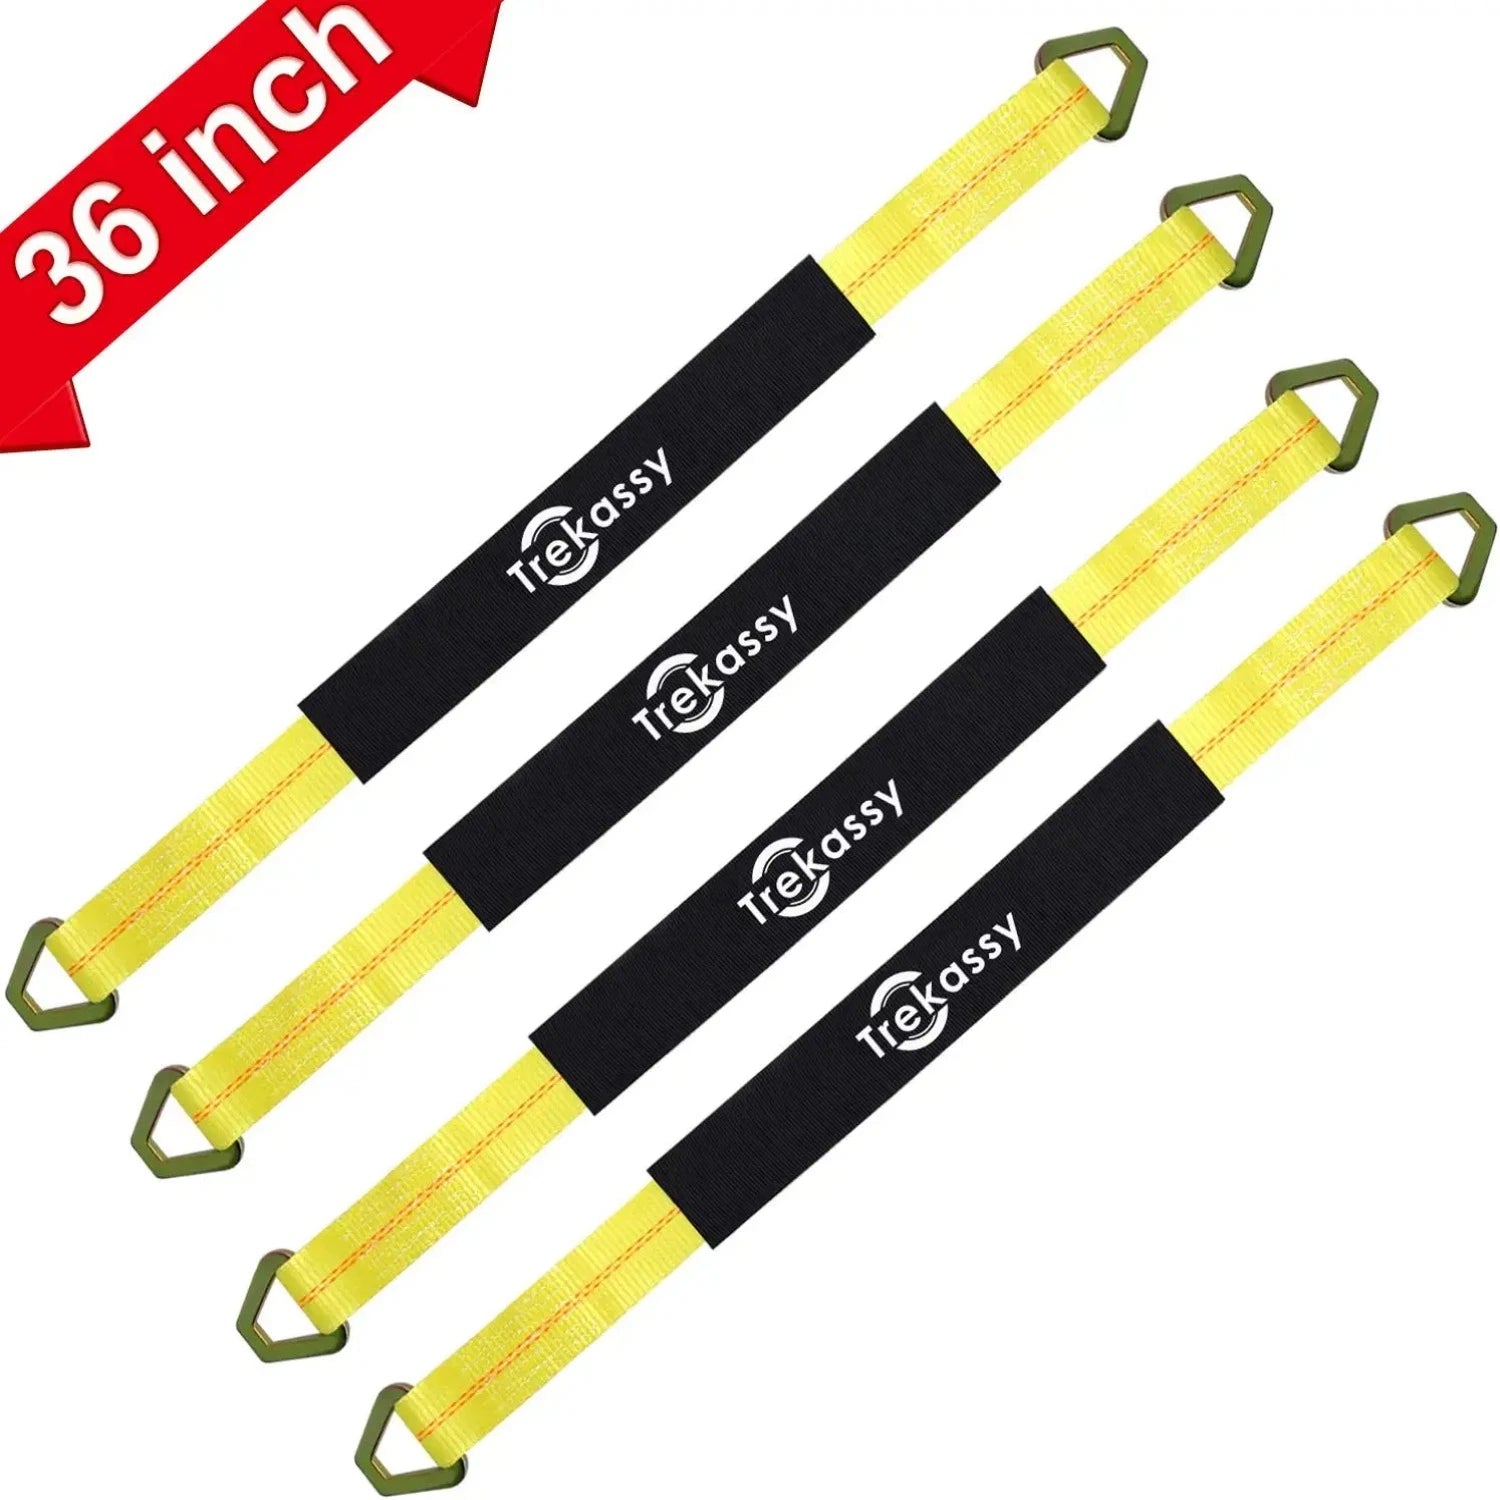 4 Pack 36"x 2"Axle Tie Down Straps with D-Ring and Protective Sleeve 10,000 Pound Capacity